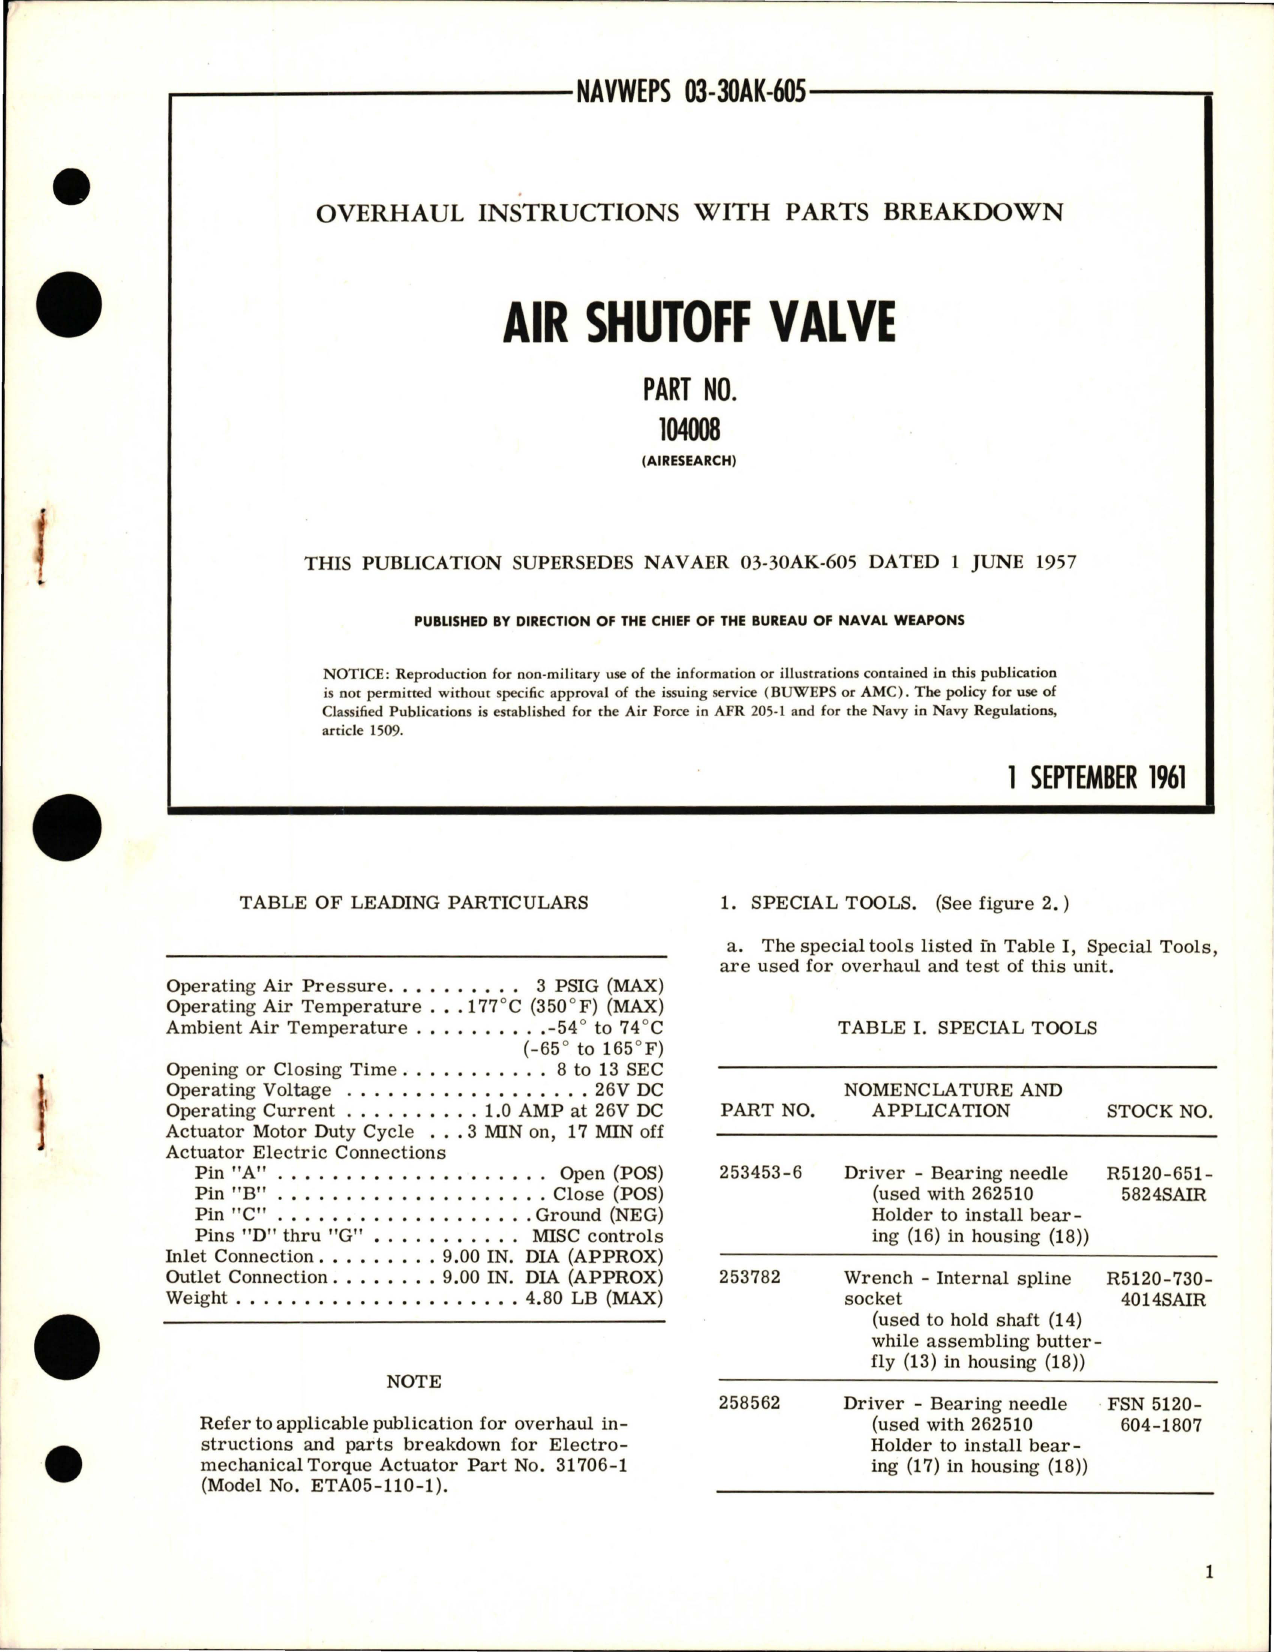 Sample page 1 from AirCorps Library document: Overhaul Instructions with Parts Breakdown for Air Shutoff Valve - Part 104008 